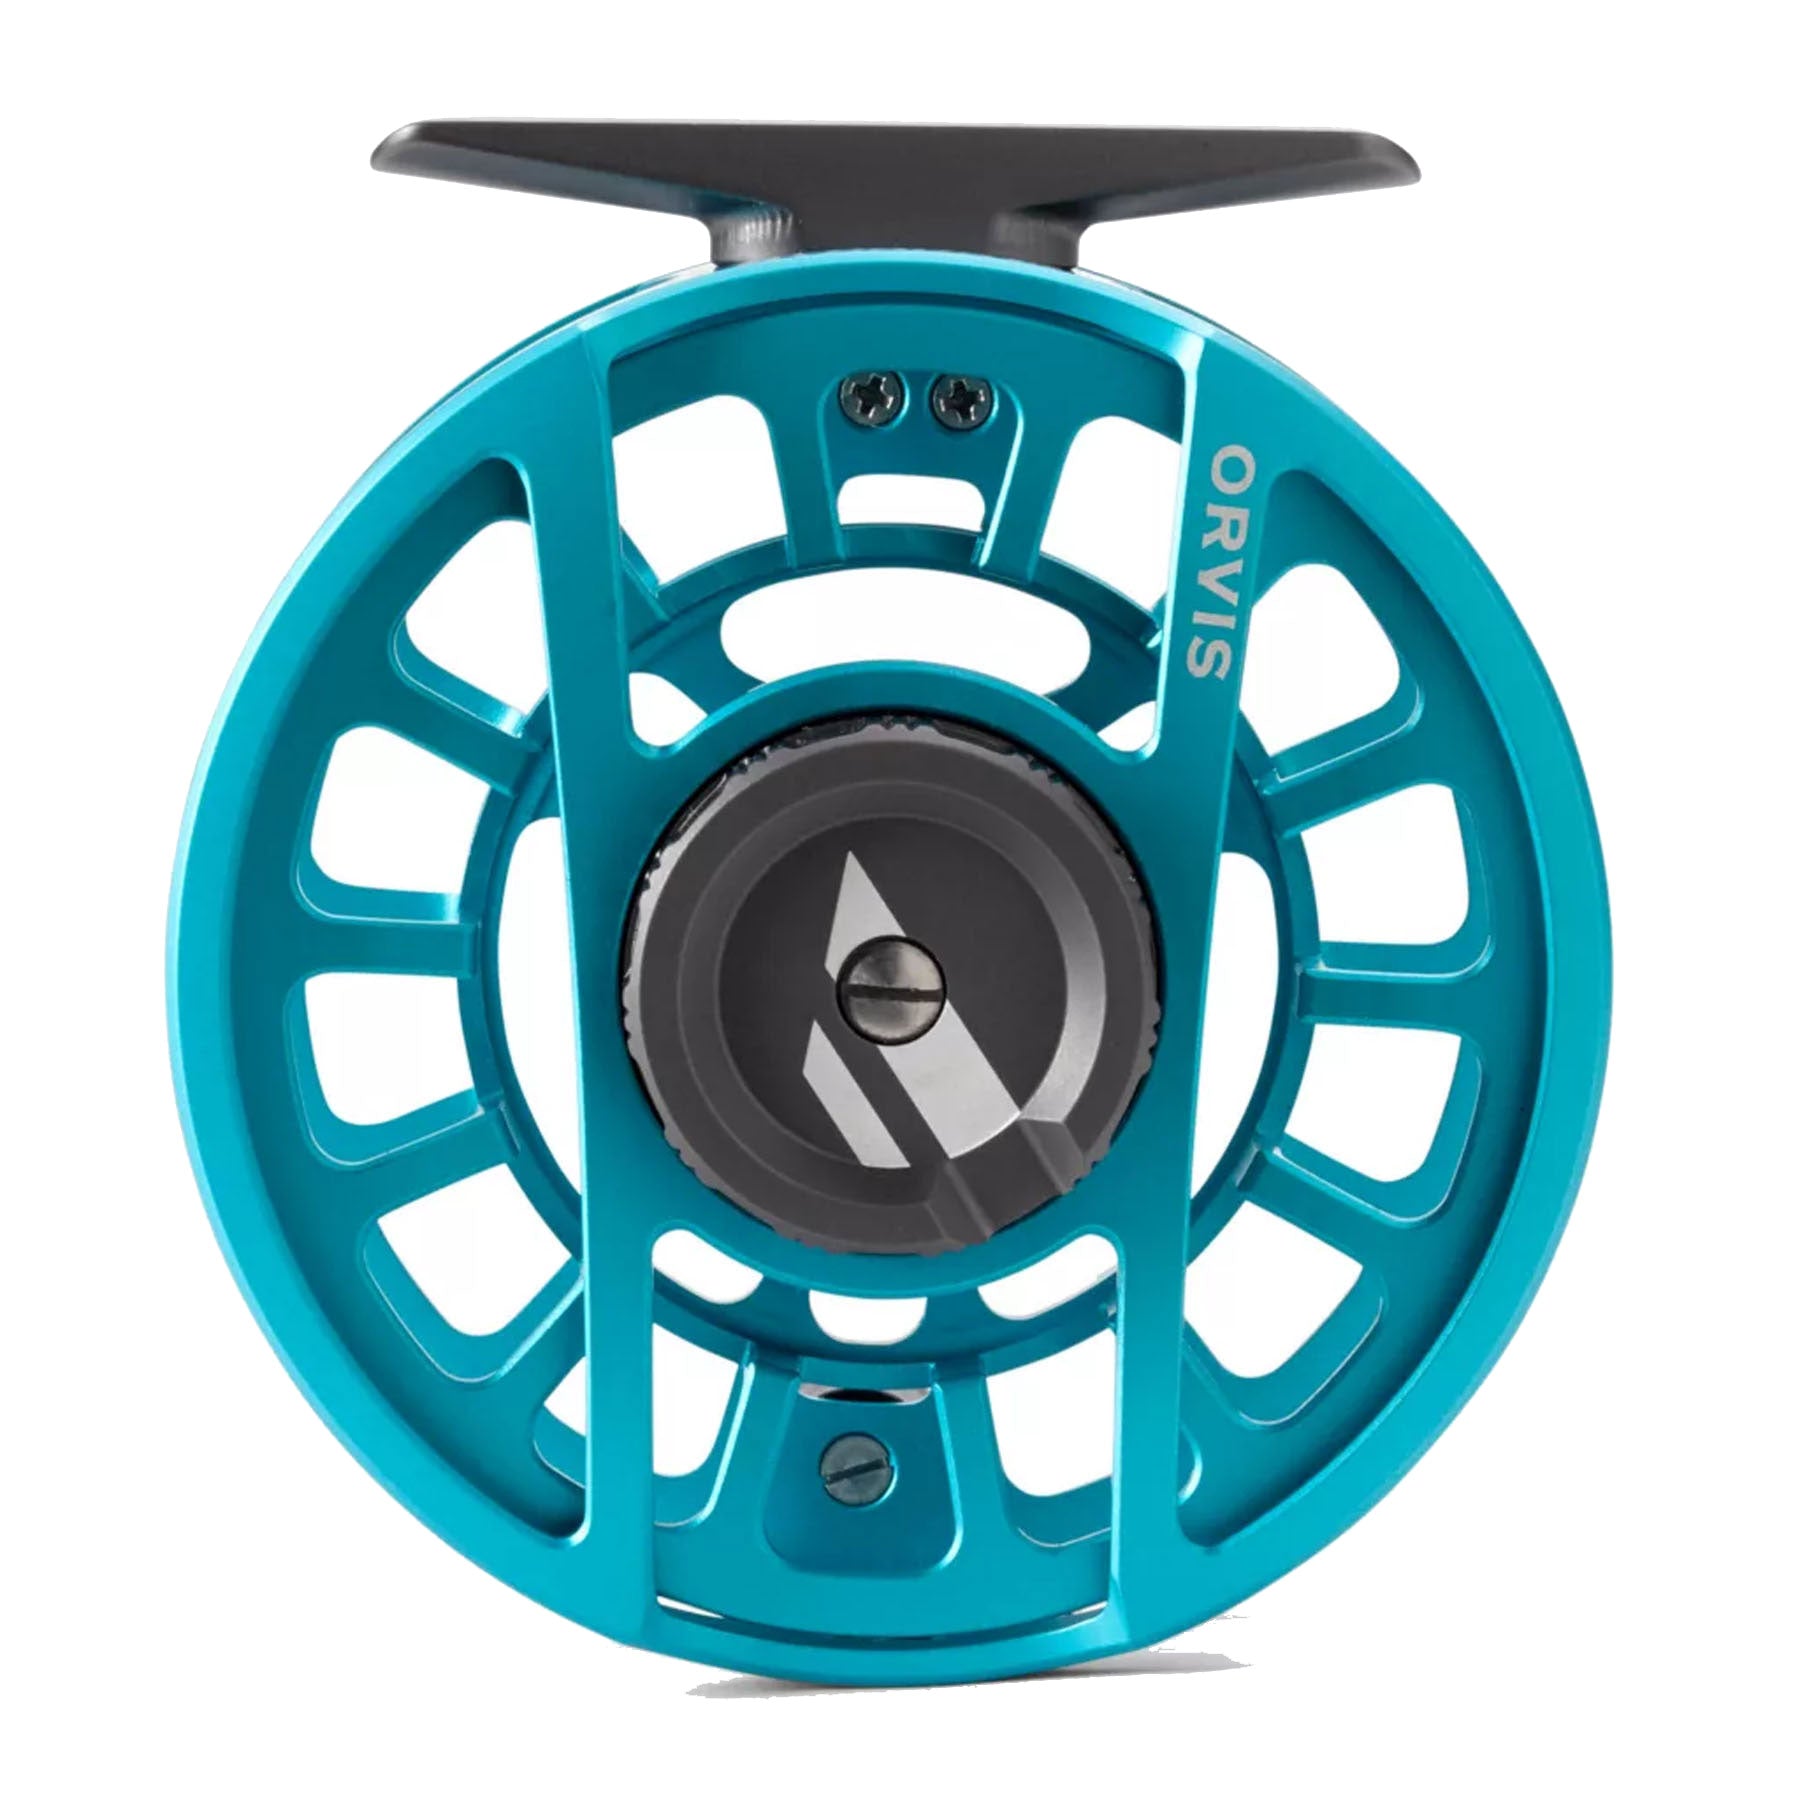 Orvis Hydros Fly Reel - Duranglers Fly Fishing Shop & Guides